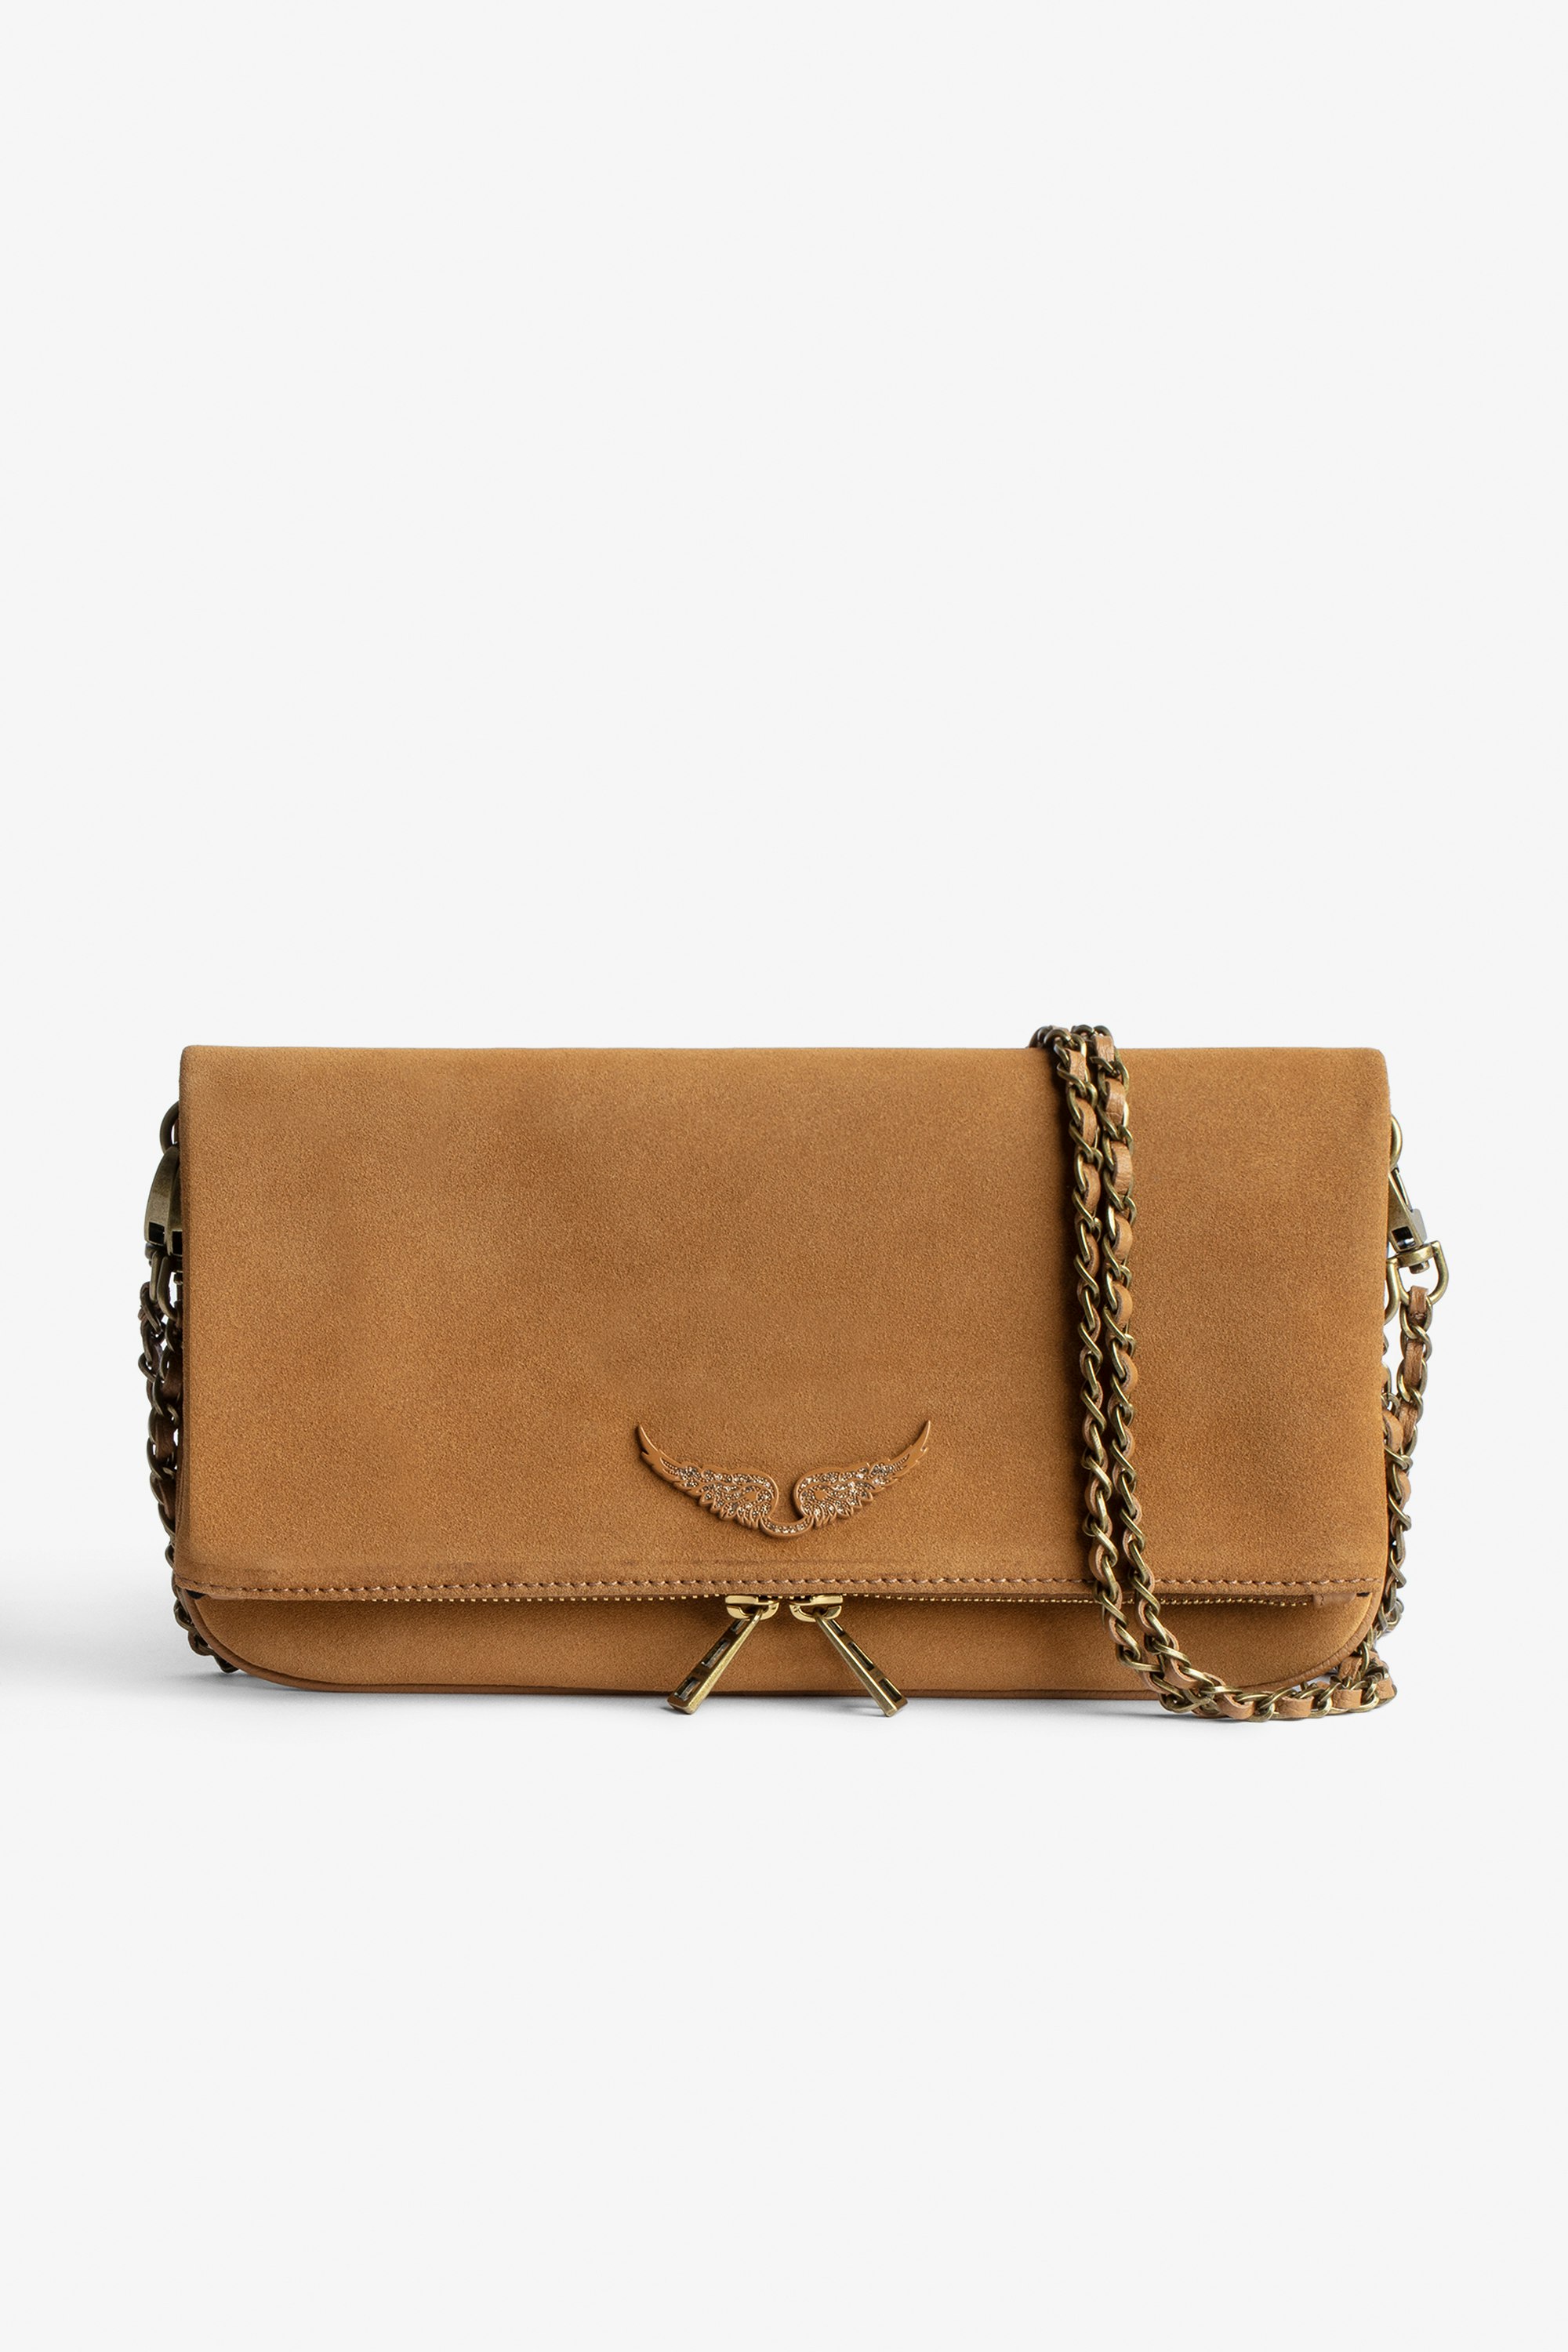 Rock Suede Clutch Women's camel suede clutch bag with leather-and-metal chain